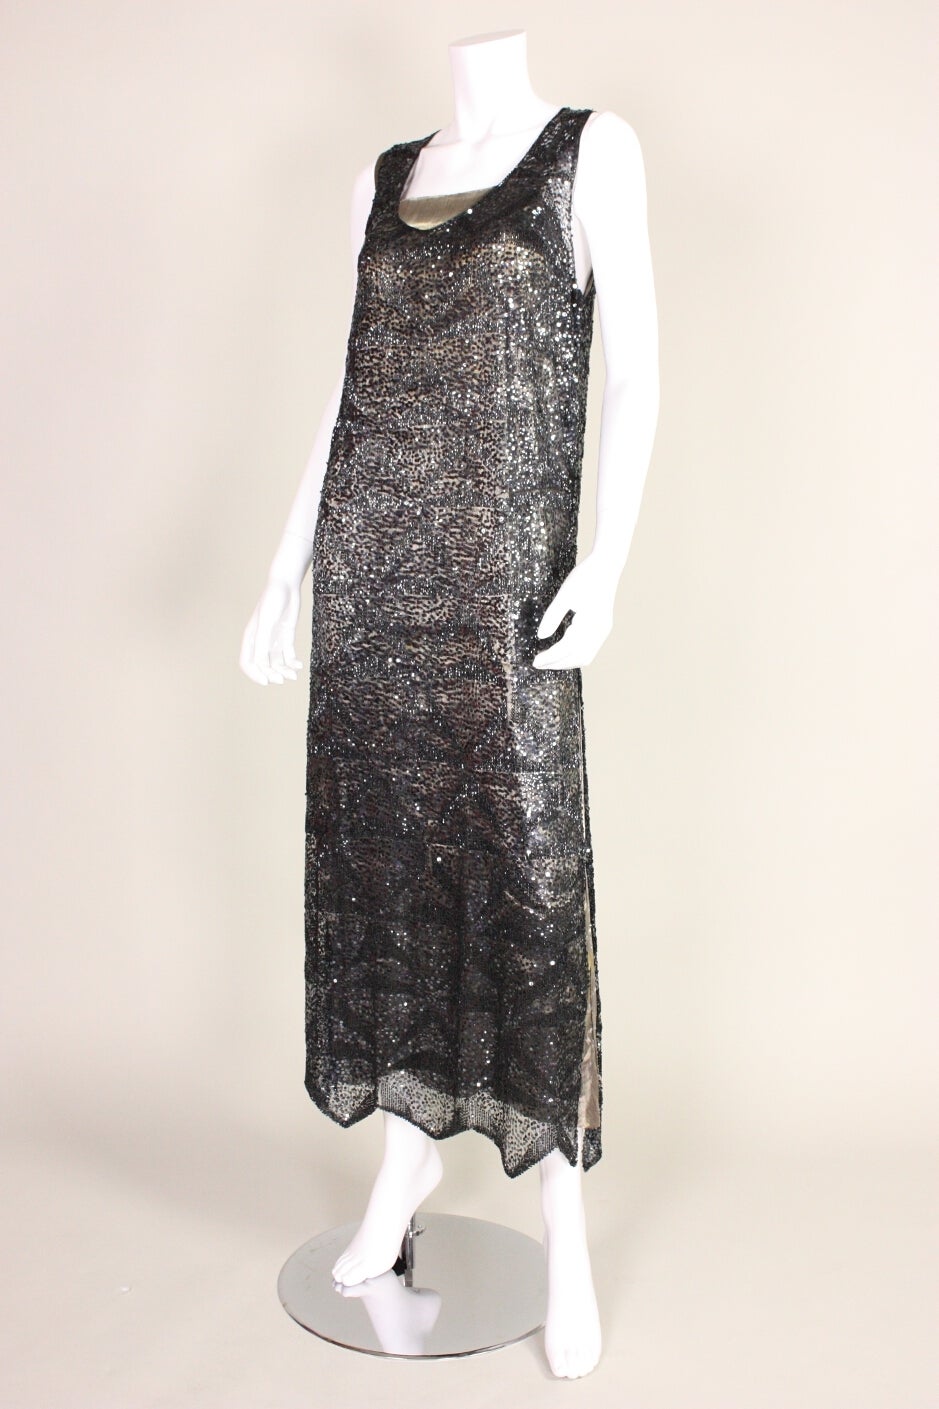 Vintage party dress dates to the 1920's during the Art Deco era.  It is made of black netting adorned with gunmetal gray small sequins and black bugle beads.  Gold lamé slip is exposed at neckline.  Zigzag hem.  Unlined.  Side snap closures.